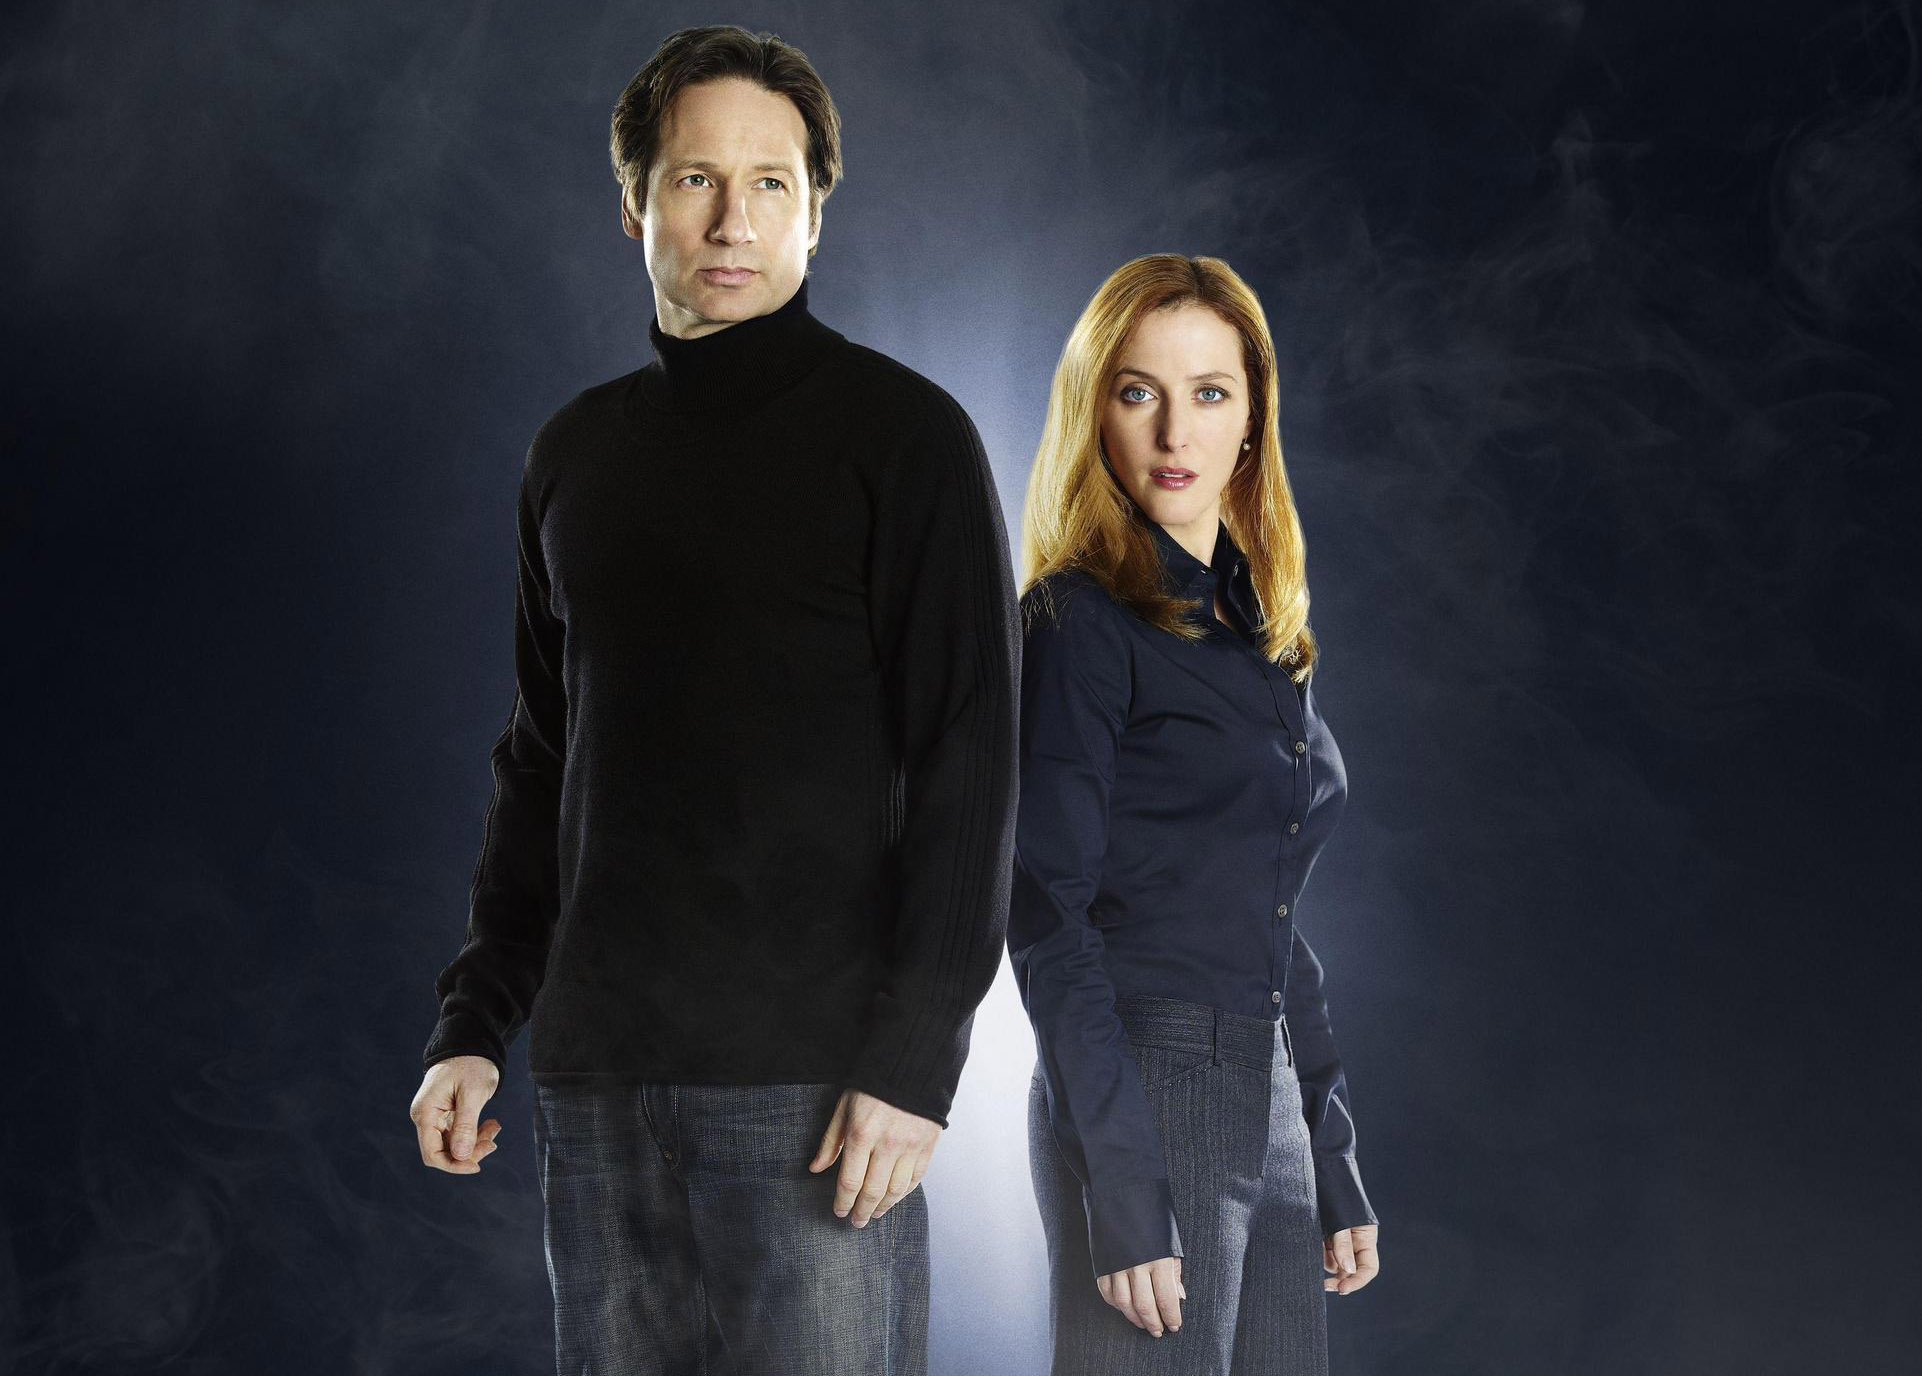 The X-Files 2016 Wallpapers High Resolution and Quality Download